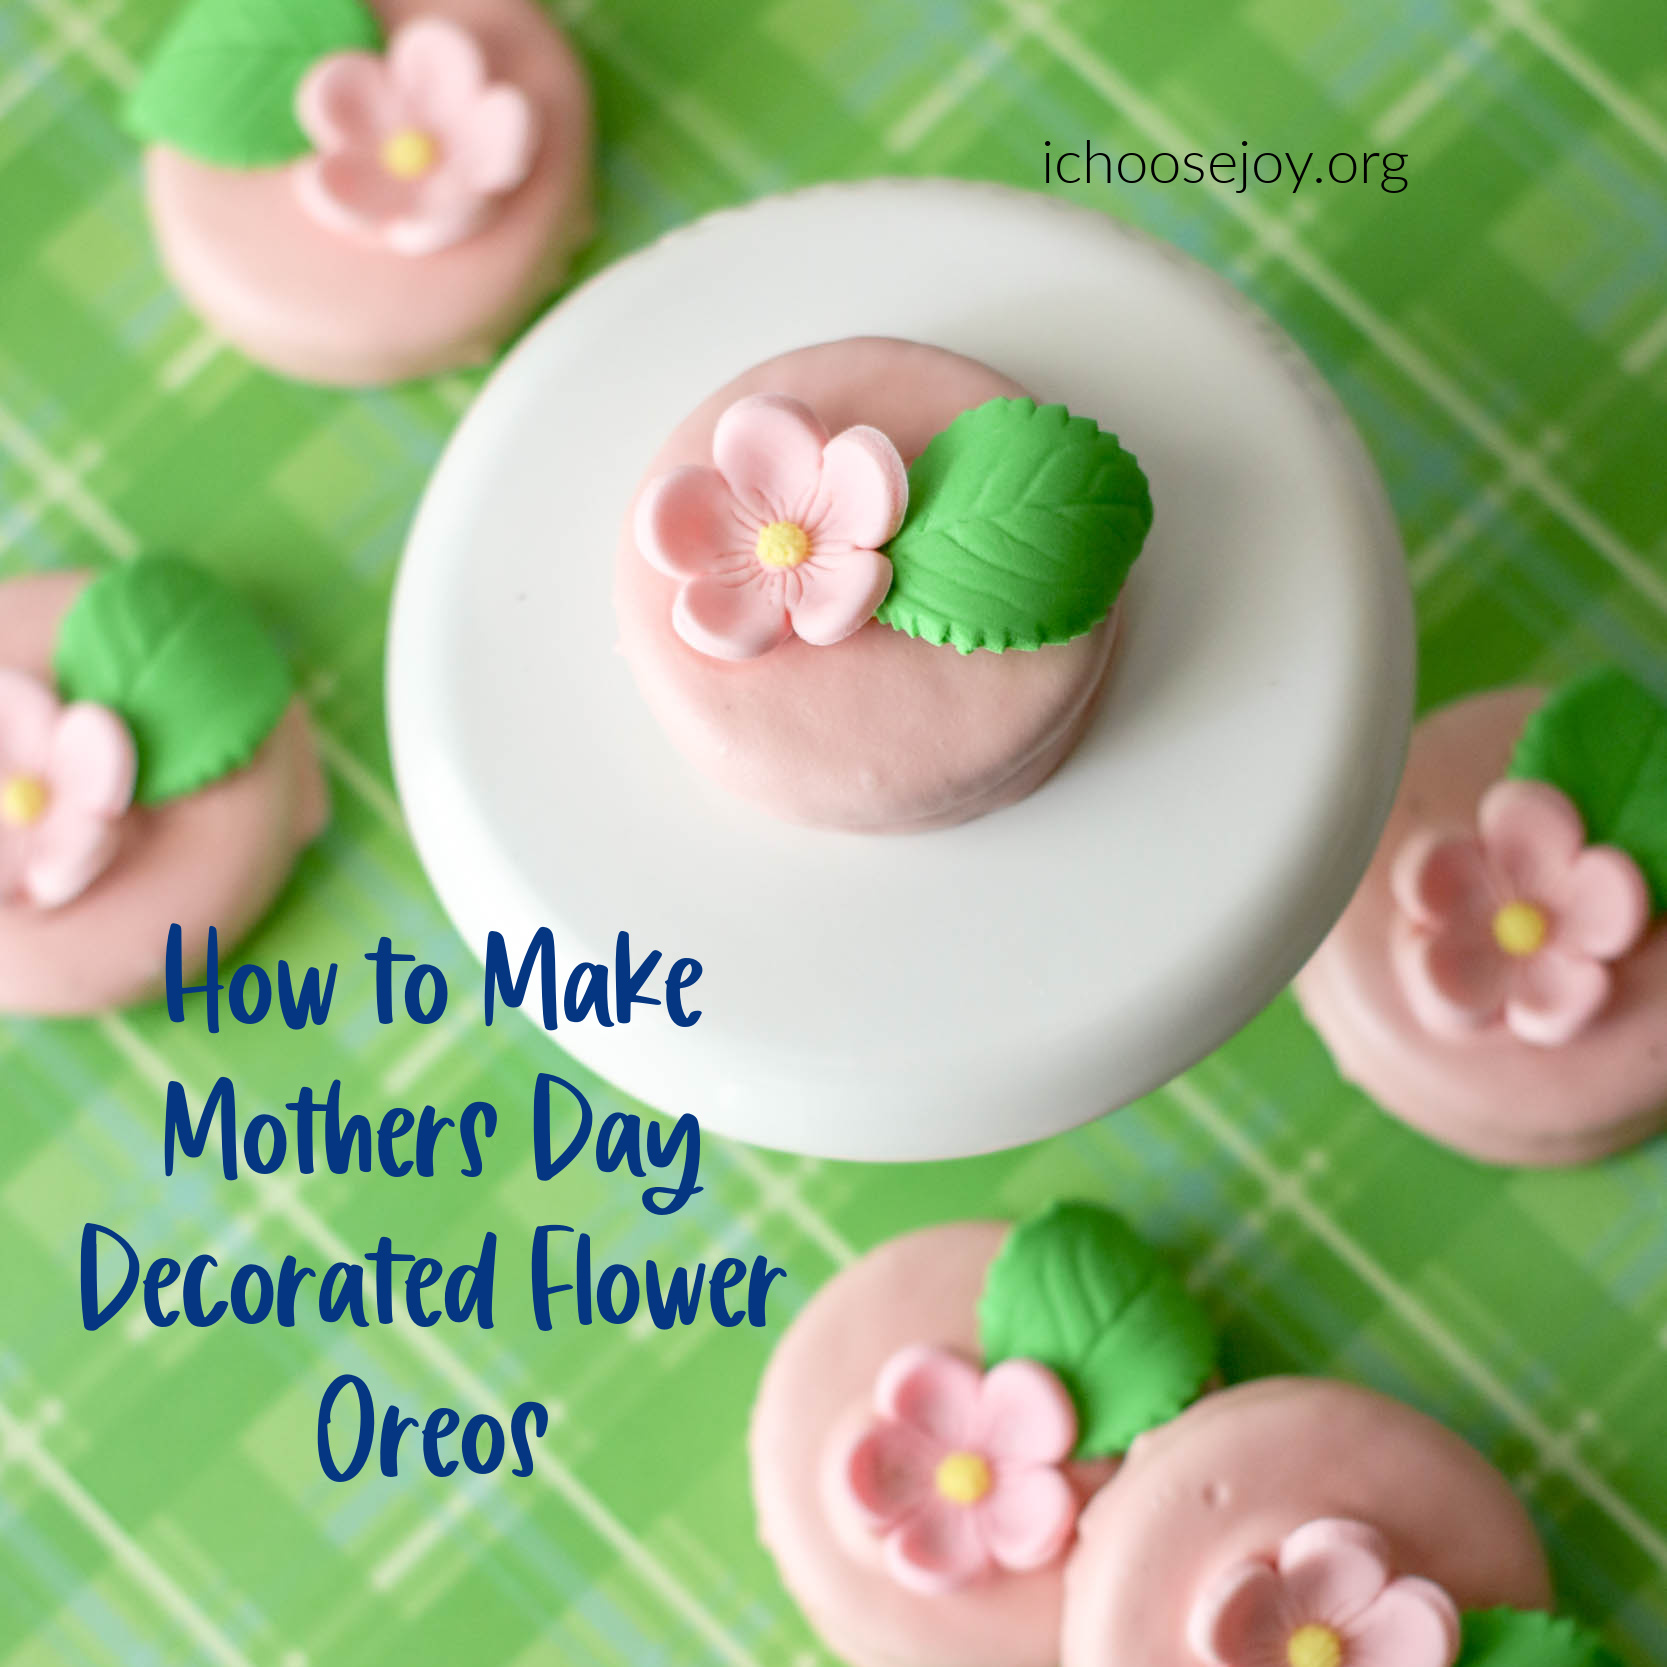 How to Make Mother's Day Decorated Flower Oreos